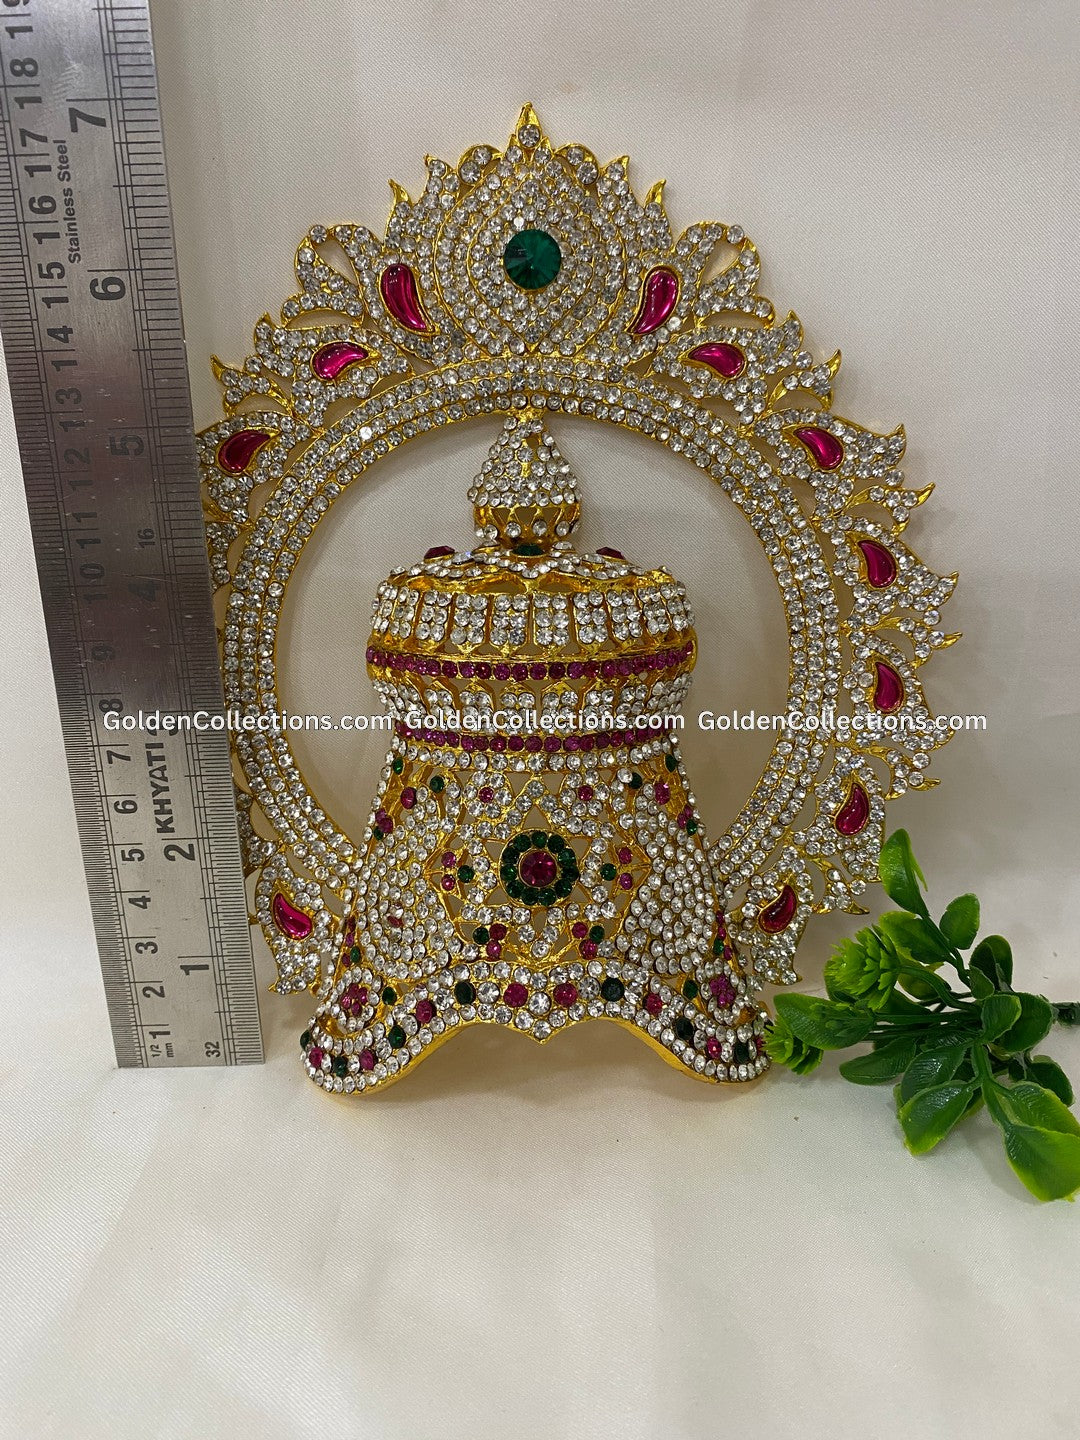 Exquisite Mukut for Goddess Idol - GoldenCollections DGC-129 2